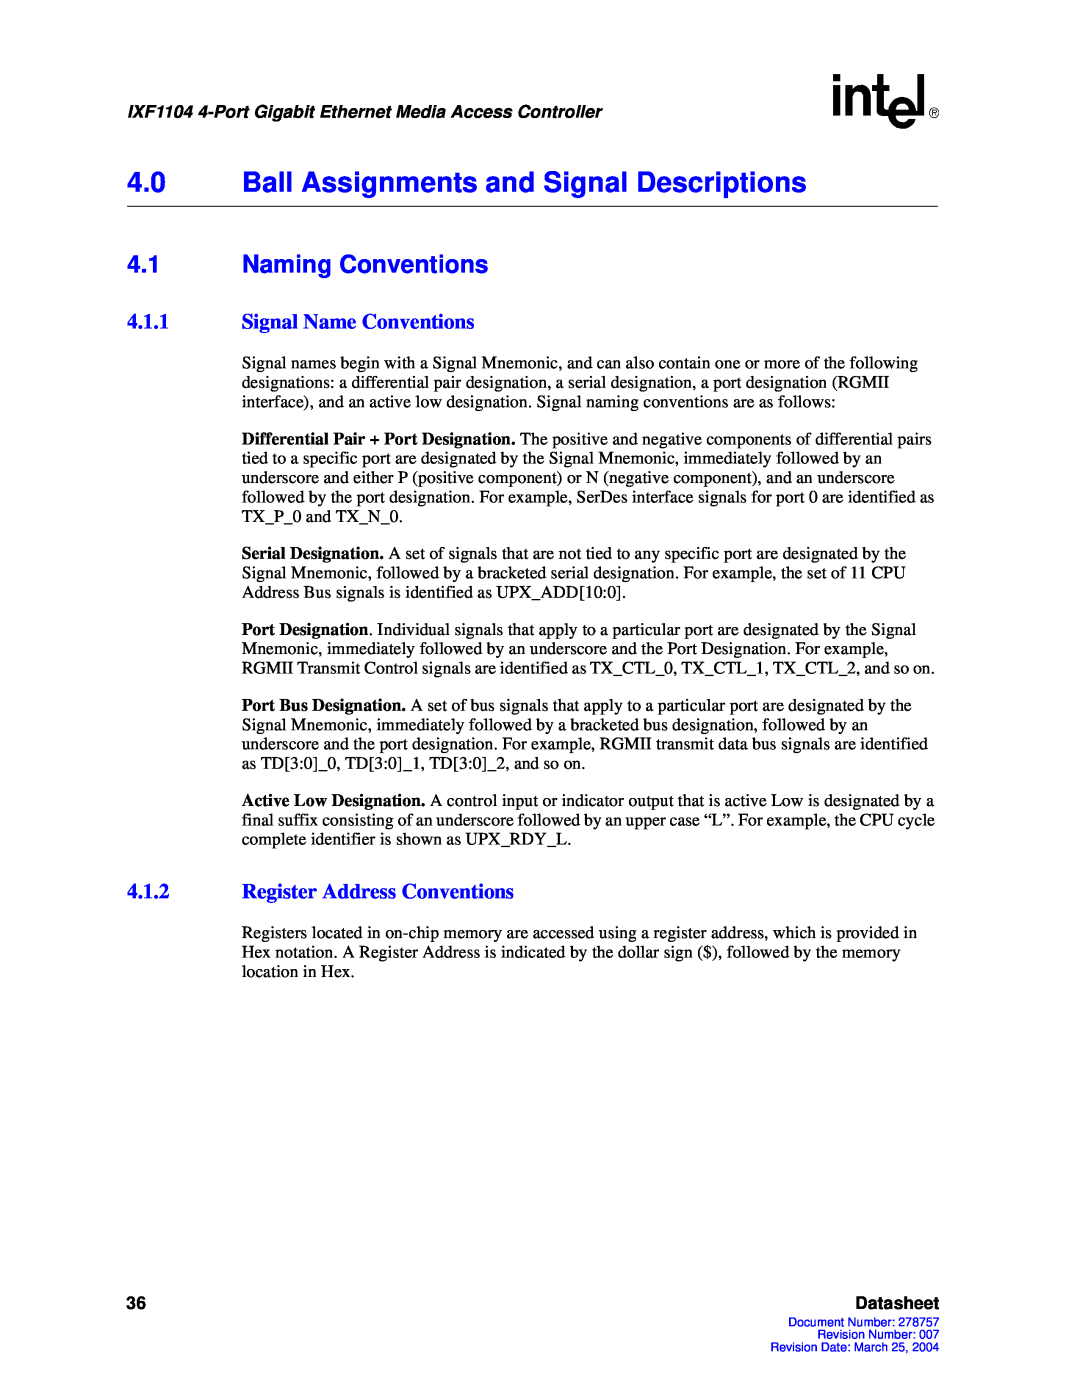 Intel IXF1104 4.0Ball Assignments and Signal Descriptions, 4.1Naming Conventions, 4.1.1Signal Name Conventions, Datasheet 